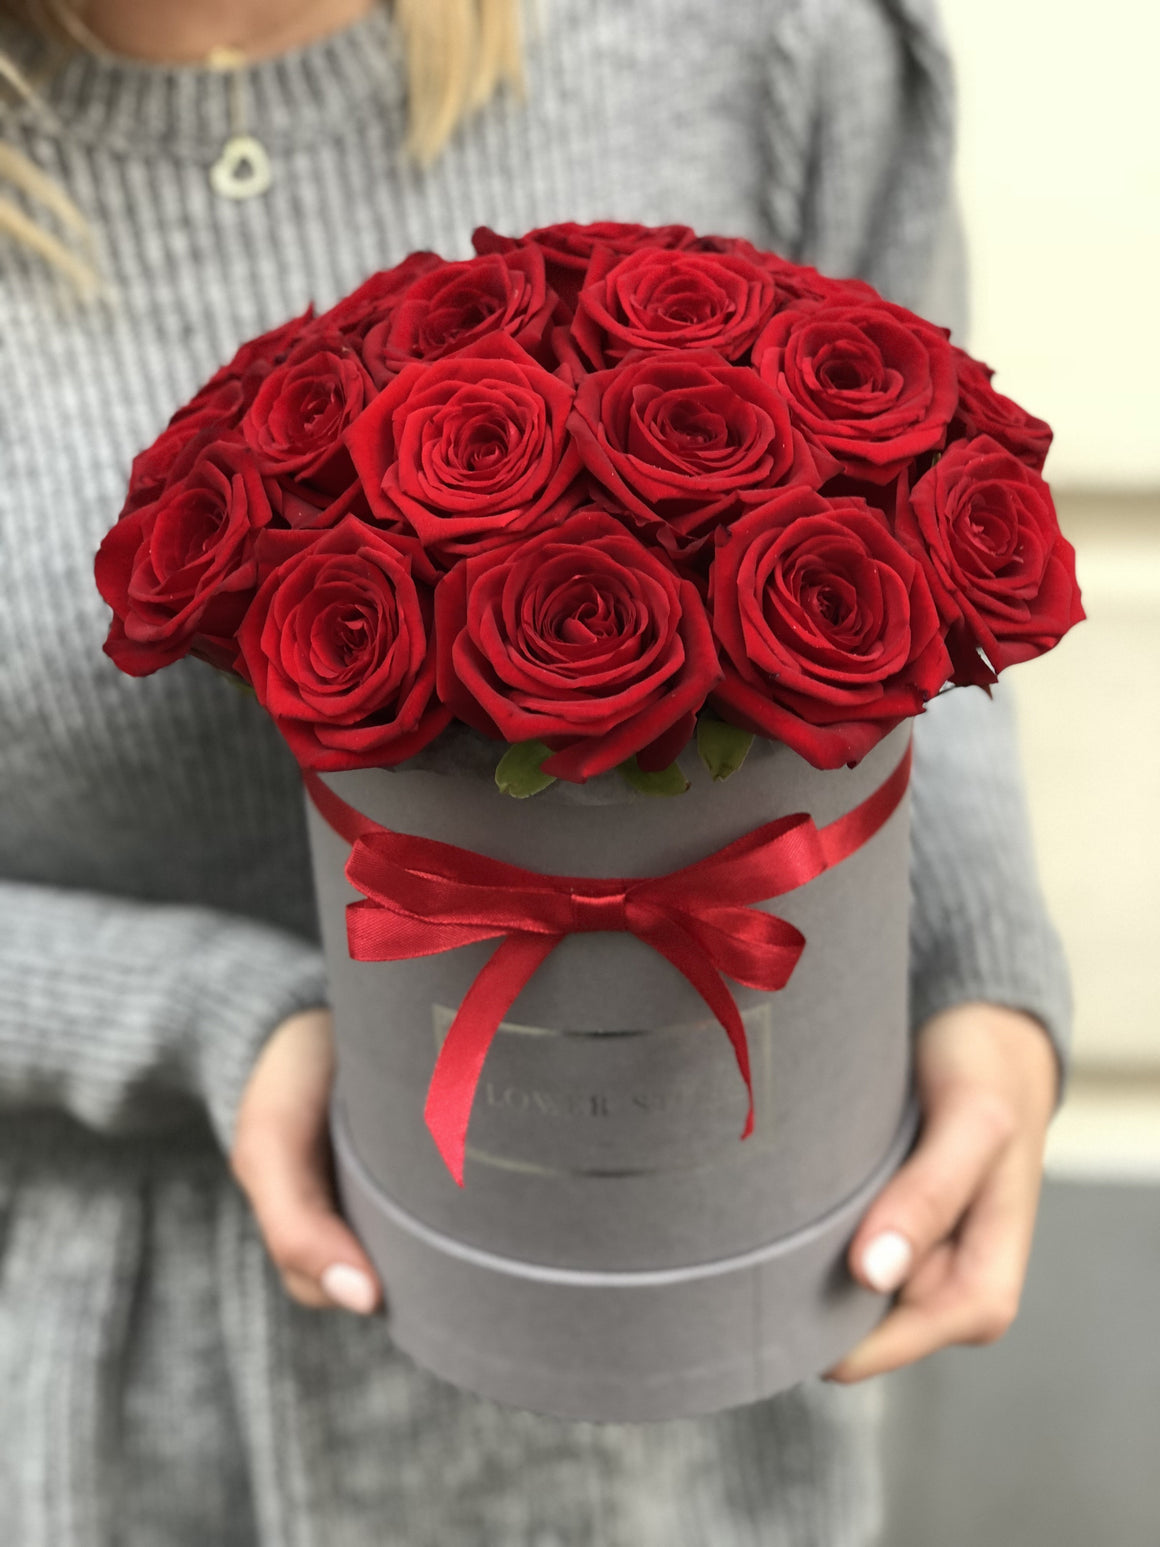 Medium gray flowerbox with red vibrant roses